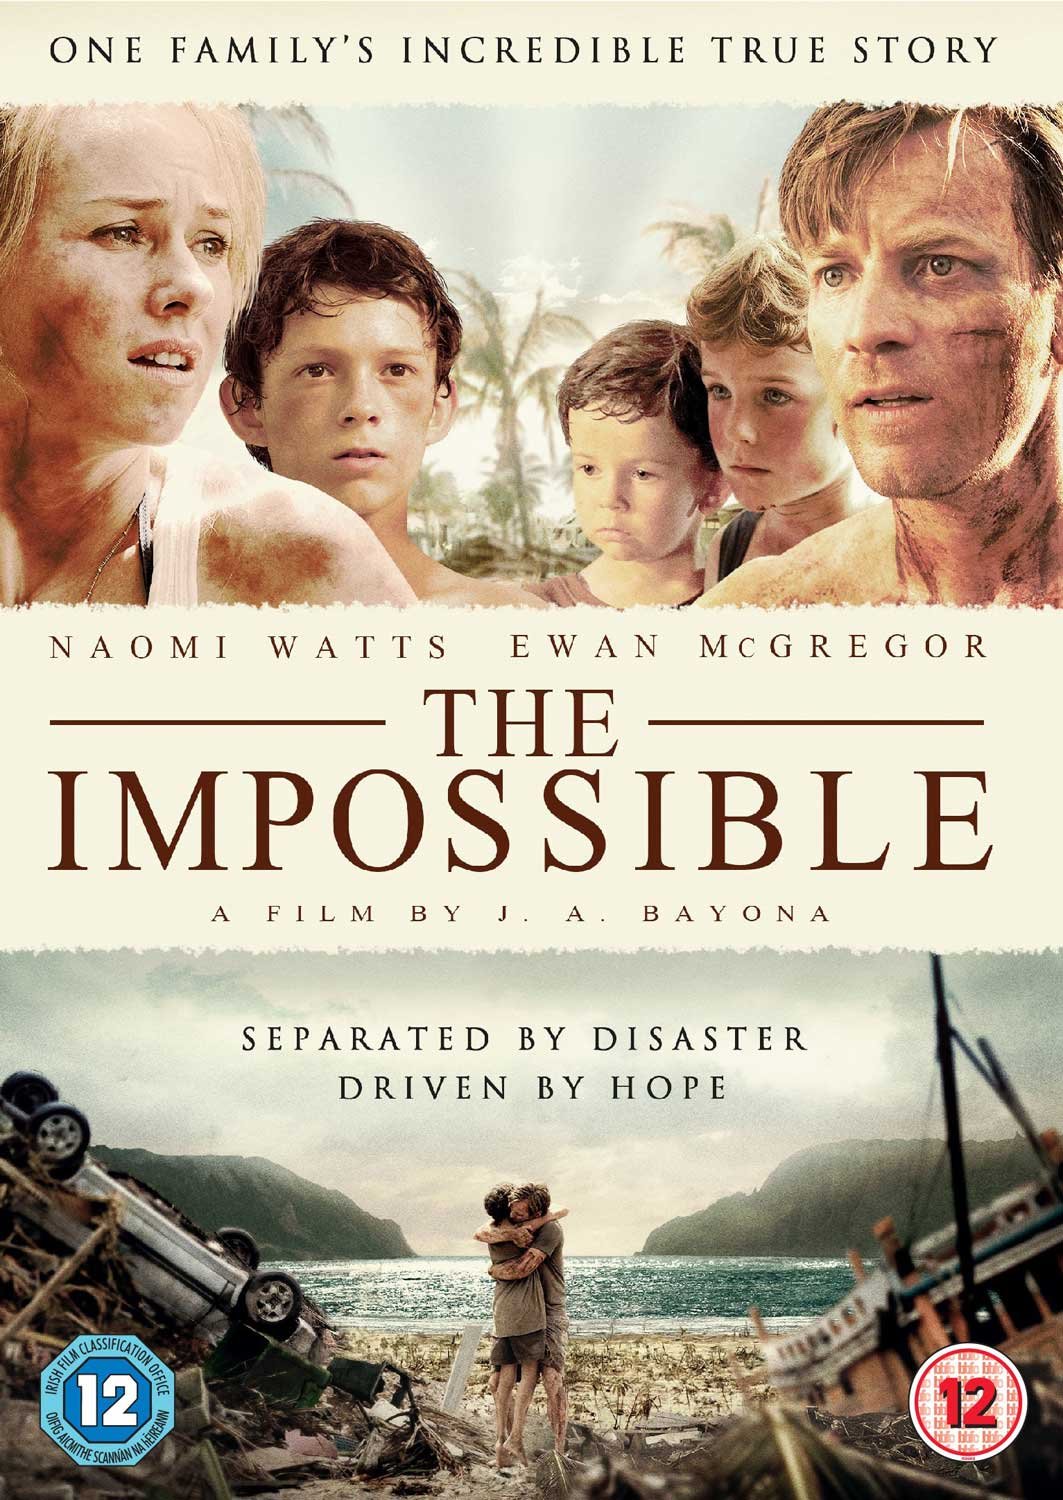 the impossible movie summary essay